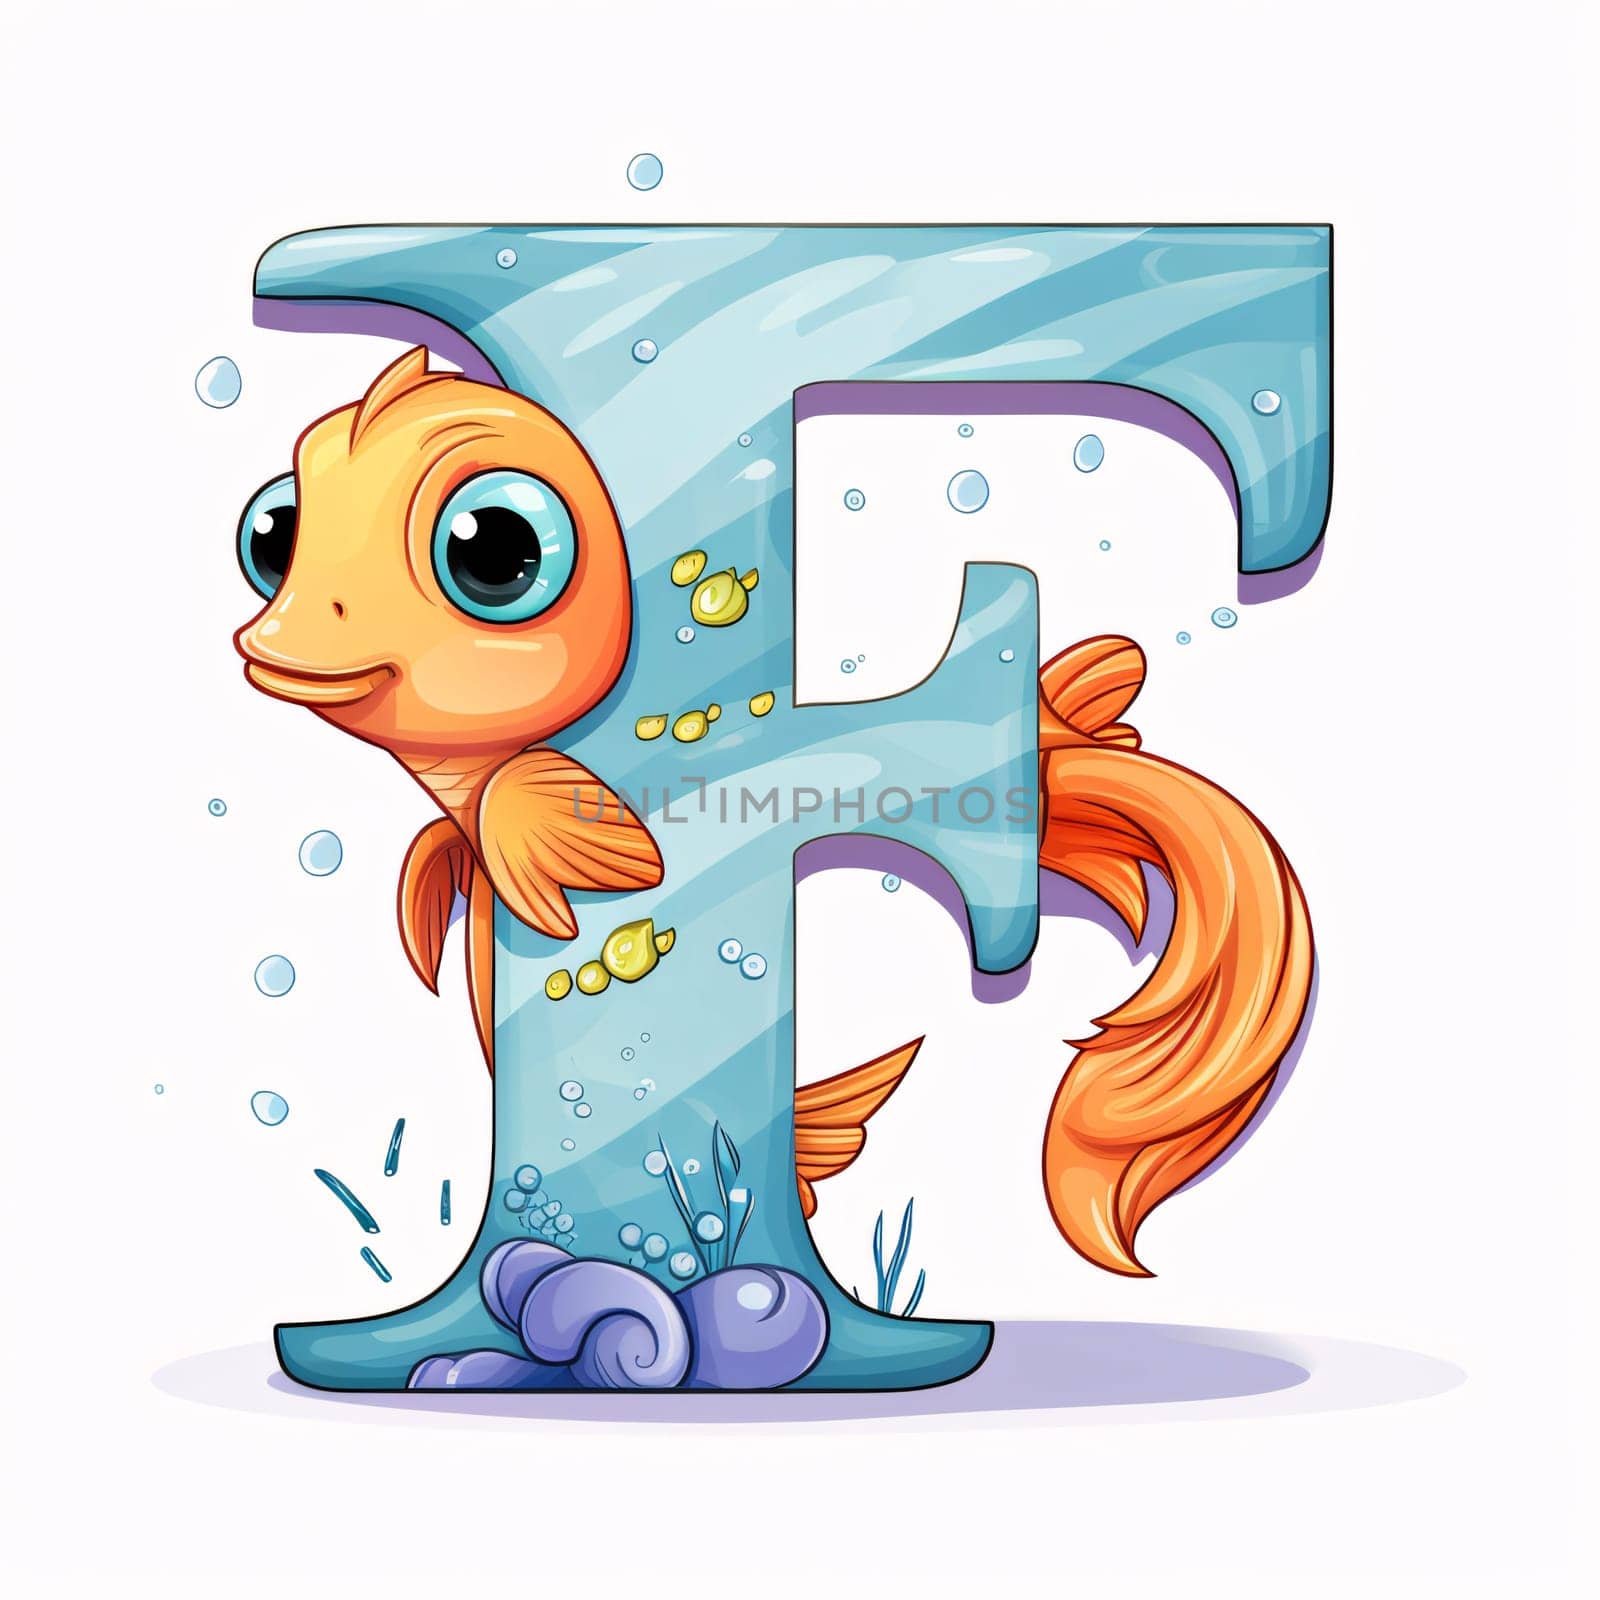 Graphic alphabet letters: Font design for letter F with cute cartoon goldfish. Vector illustration.